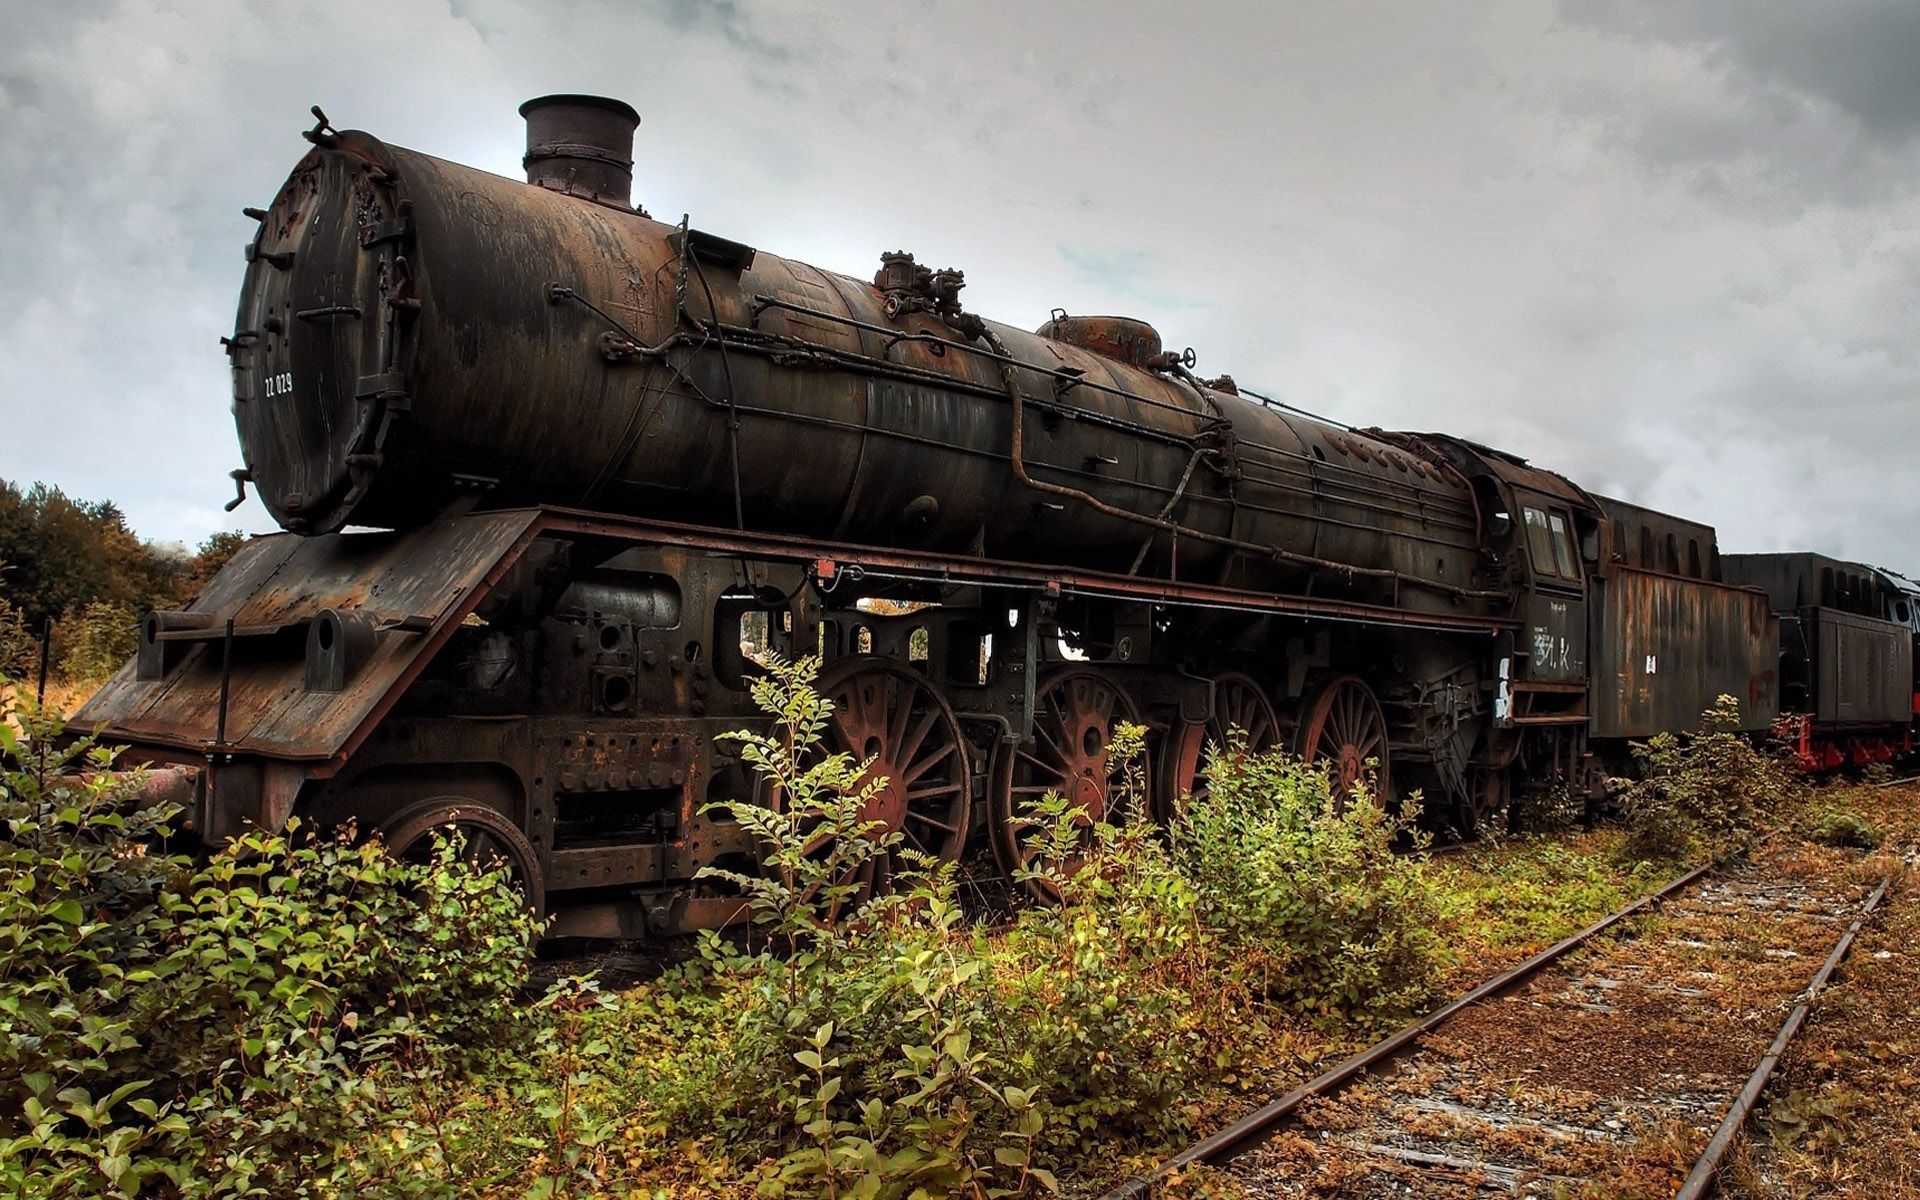 Old Rusty Trains | HD Nature Wallpapers for Mobile and Desktop